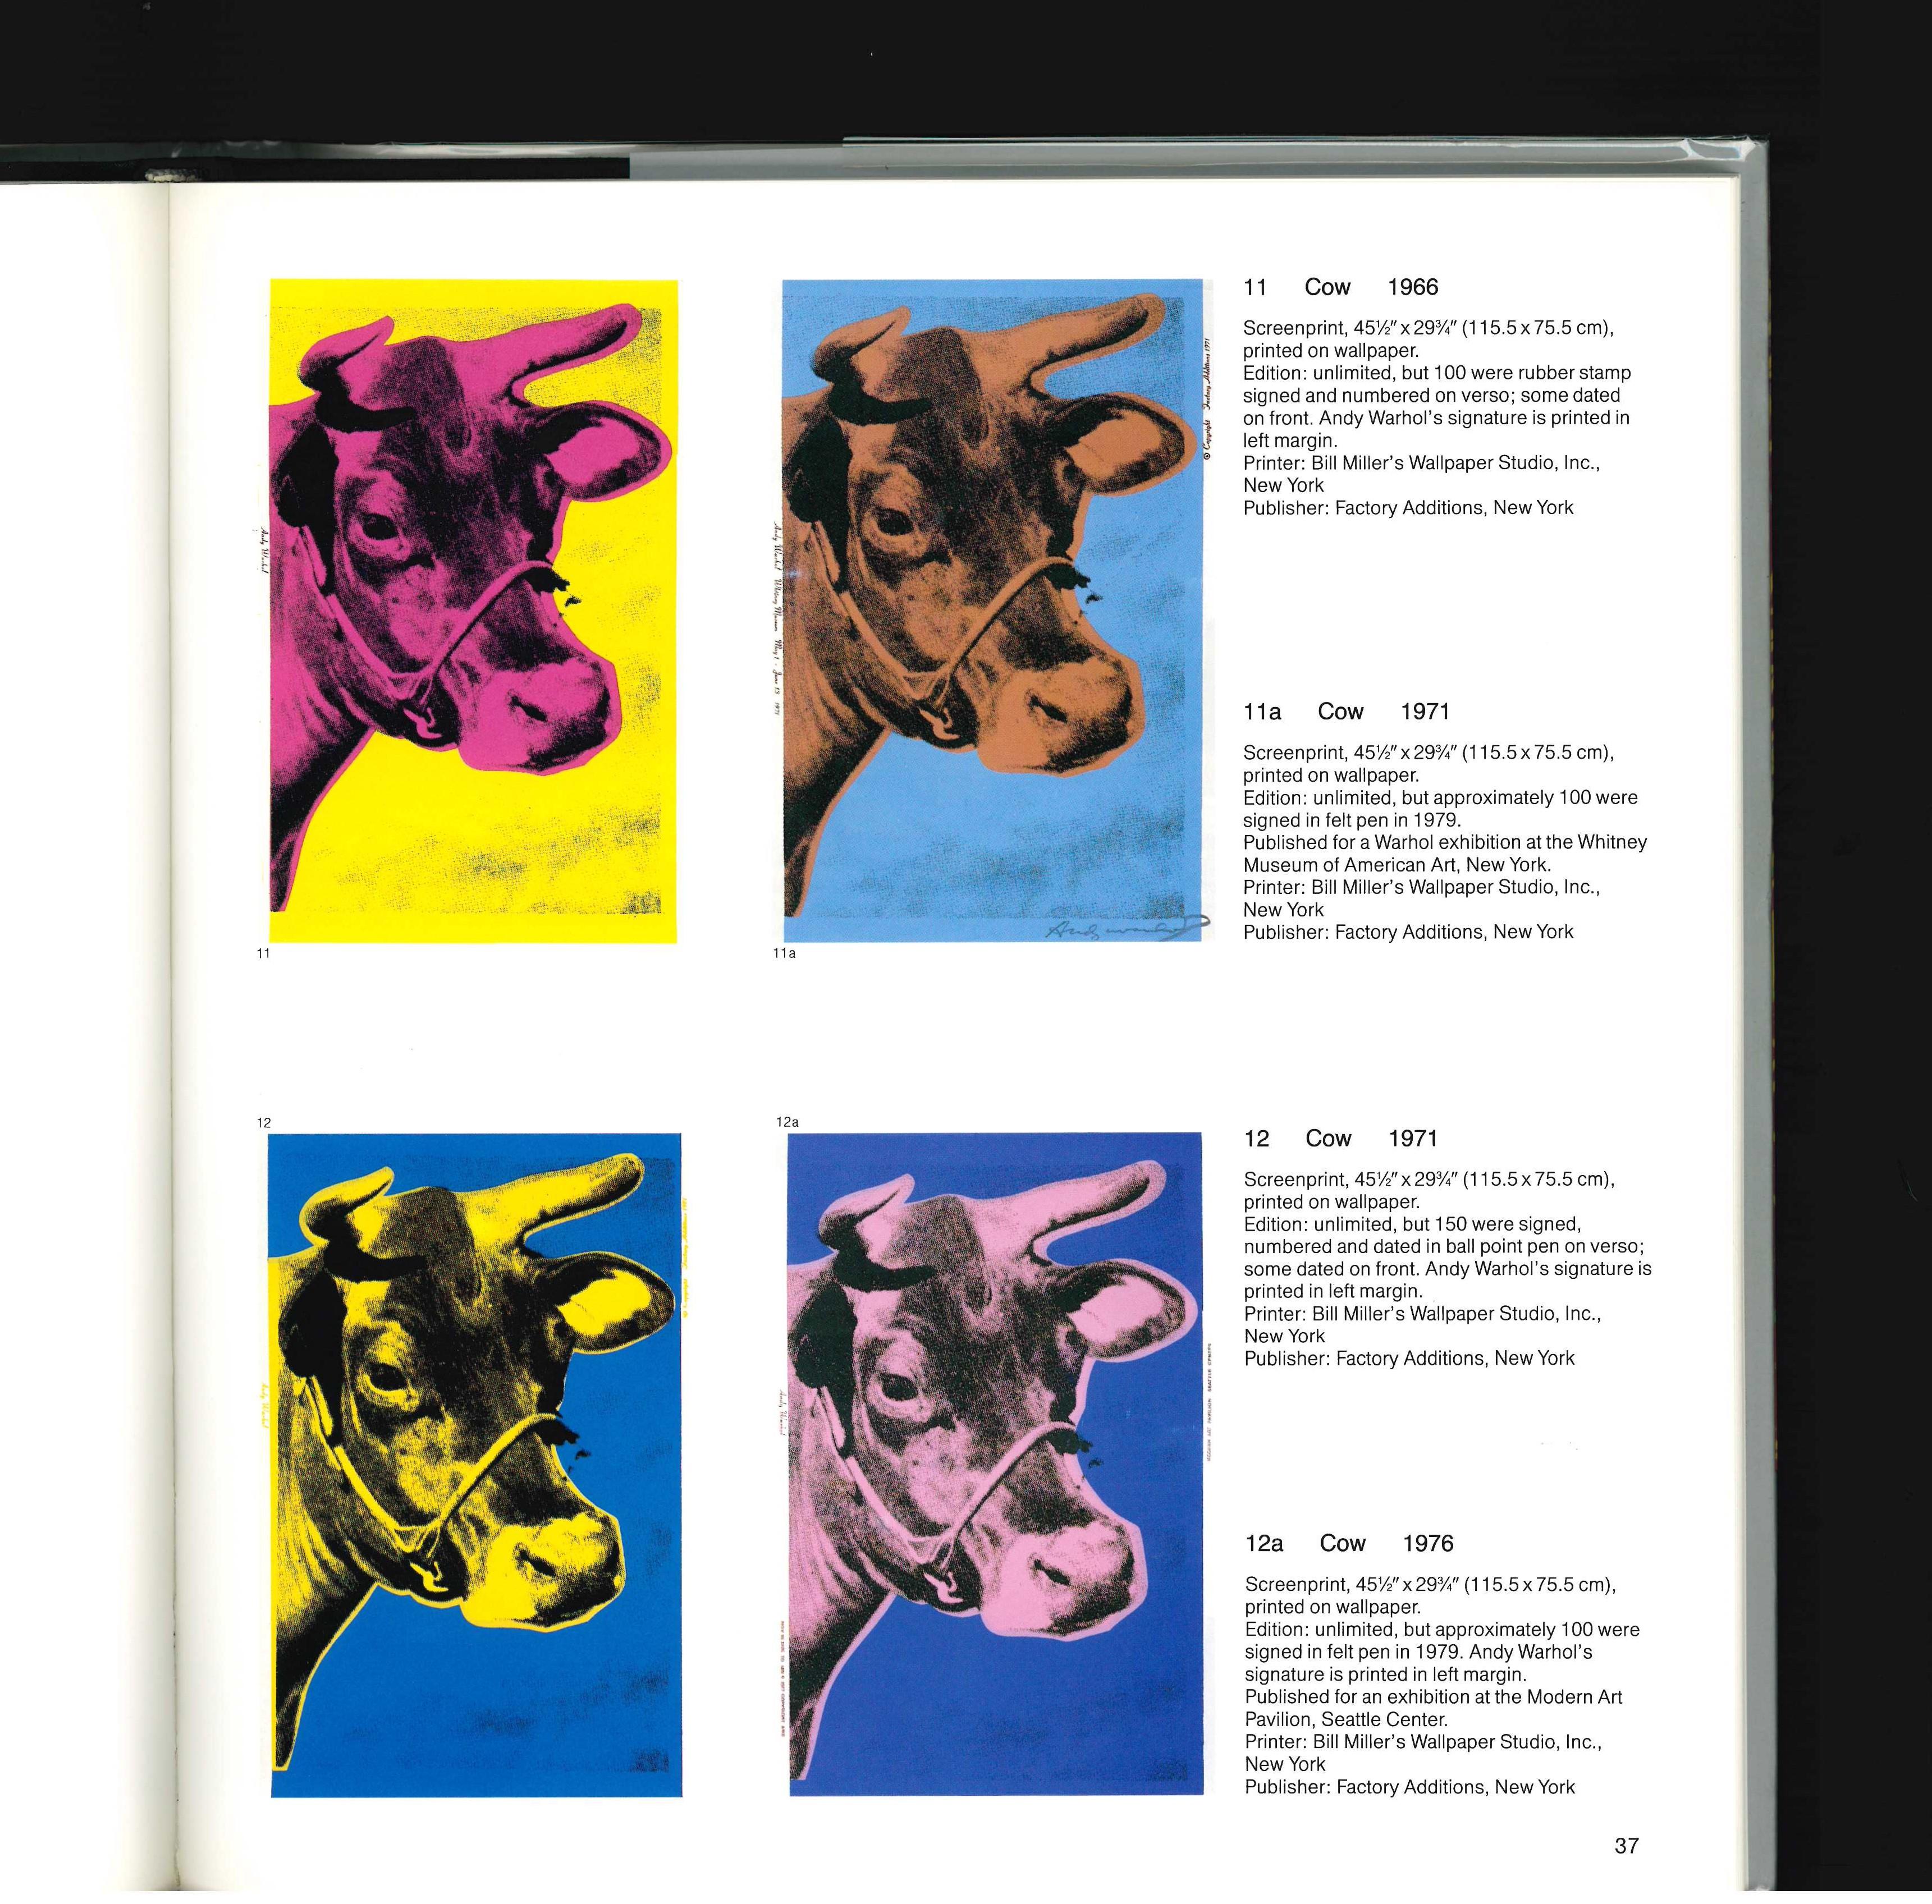 This book is the revised and expanded edition of the Catalogue Raisonne representing every edition of prints that Warhol published. Every print is accompanied by thorough documentation and 409 are reproduced in high quality color. Warhol was one of